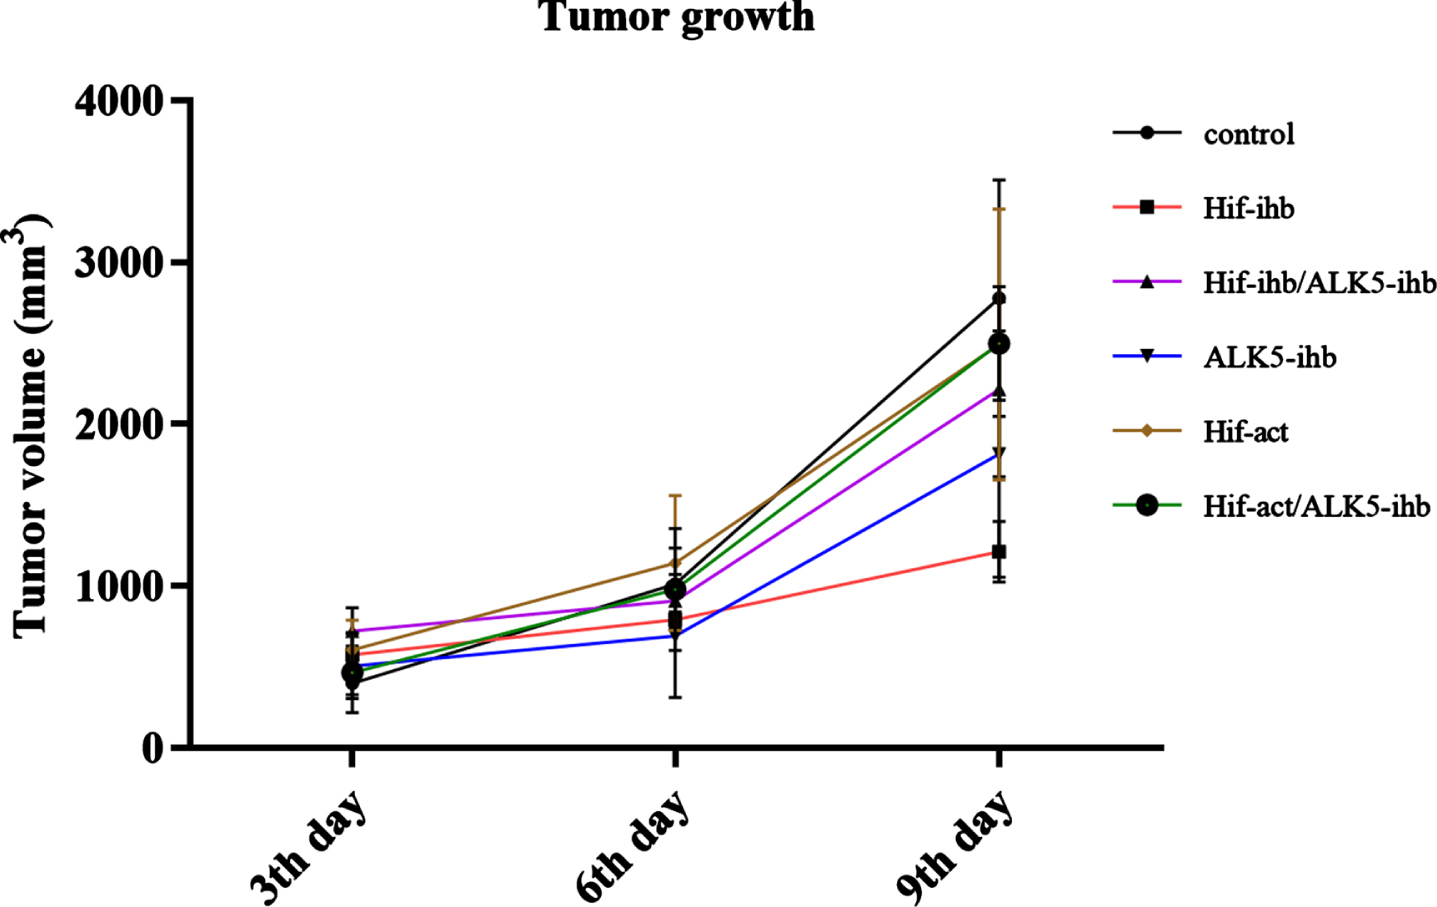 The rate of tumor growth in the melanoma mouse model. The rate of tumor growth showed a significantly lighter slope in the HIF-ihb group (***p < 0.005) compared to the control group and the HIF-act group, indicating the role of HIF inhibition in tumor growth prevention. The tumor volumes measured on the 3rd, 6th, and 9th day after intervention commencement. Alk5-ihb: ALK5 inhibitor, HIF-ihb: HIF-1α inhibitor, HIF-act: HIF-1α activator.